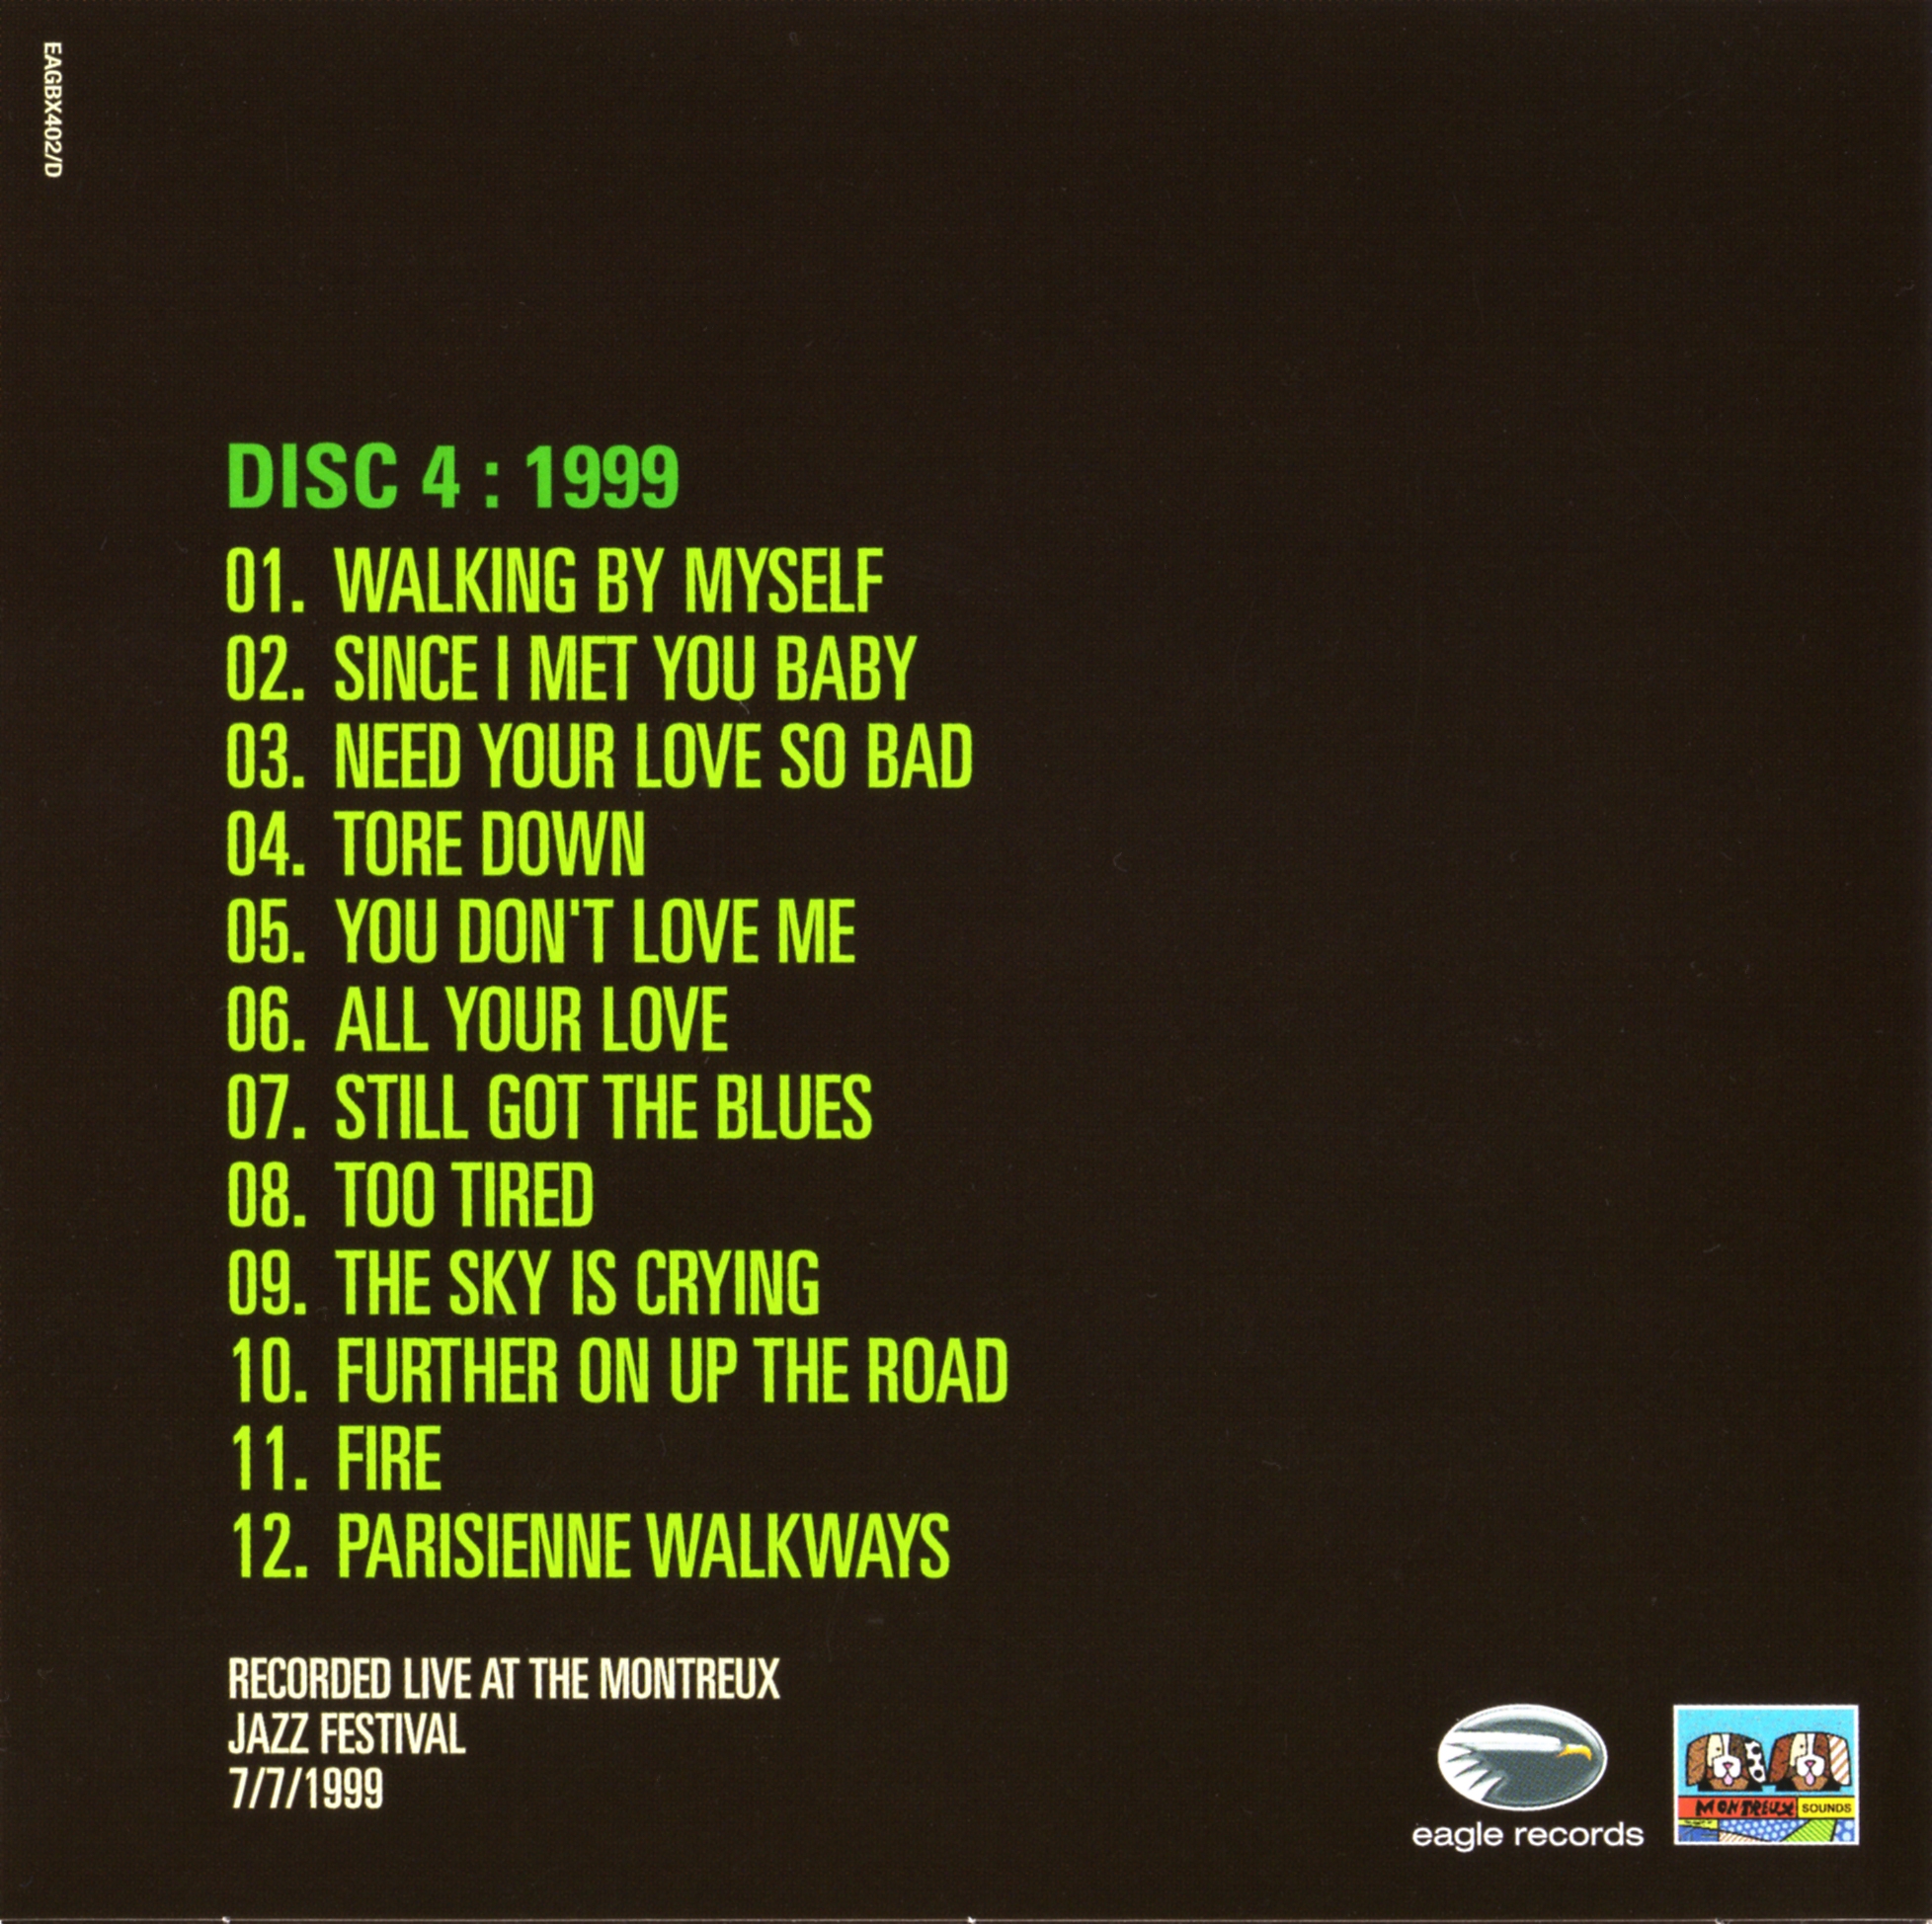 Covers - Essential Montreux Disc 4, Sleeve Back.jpg